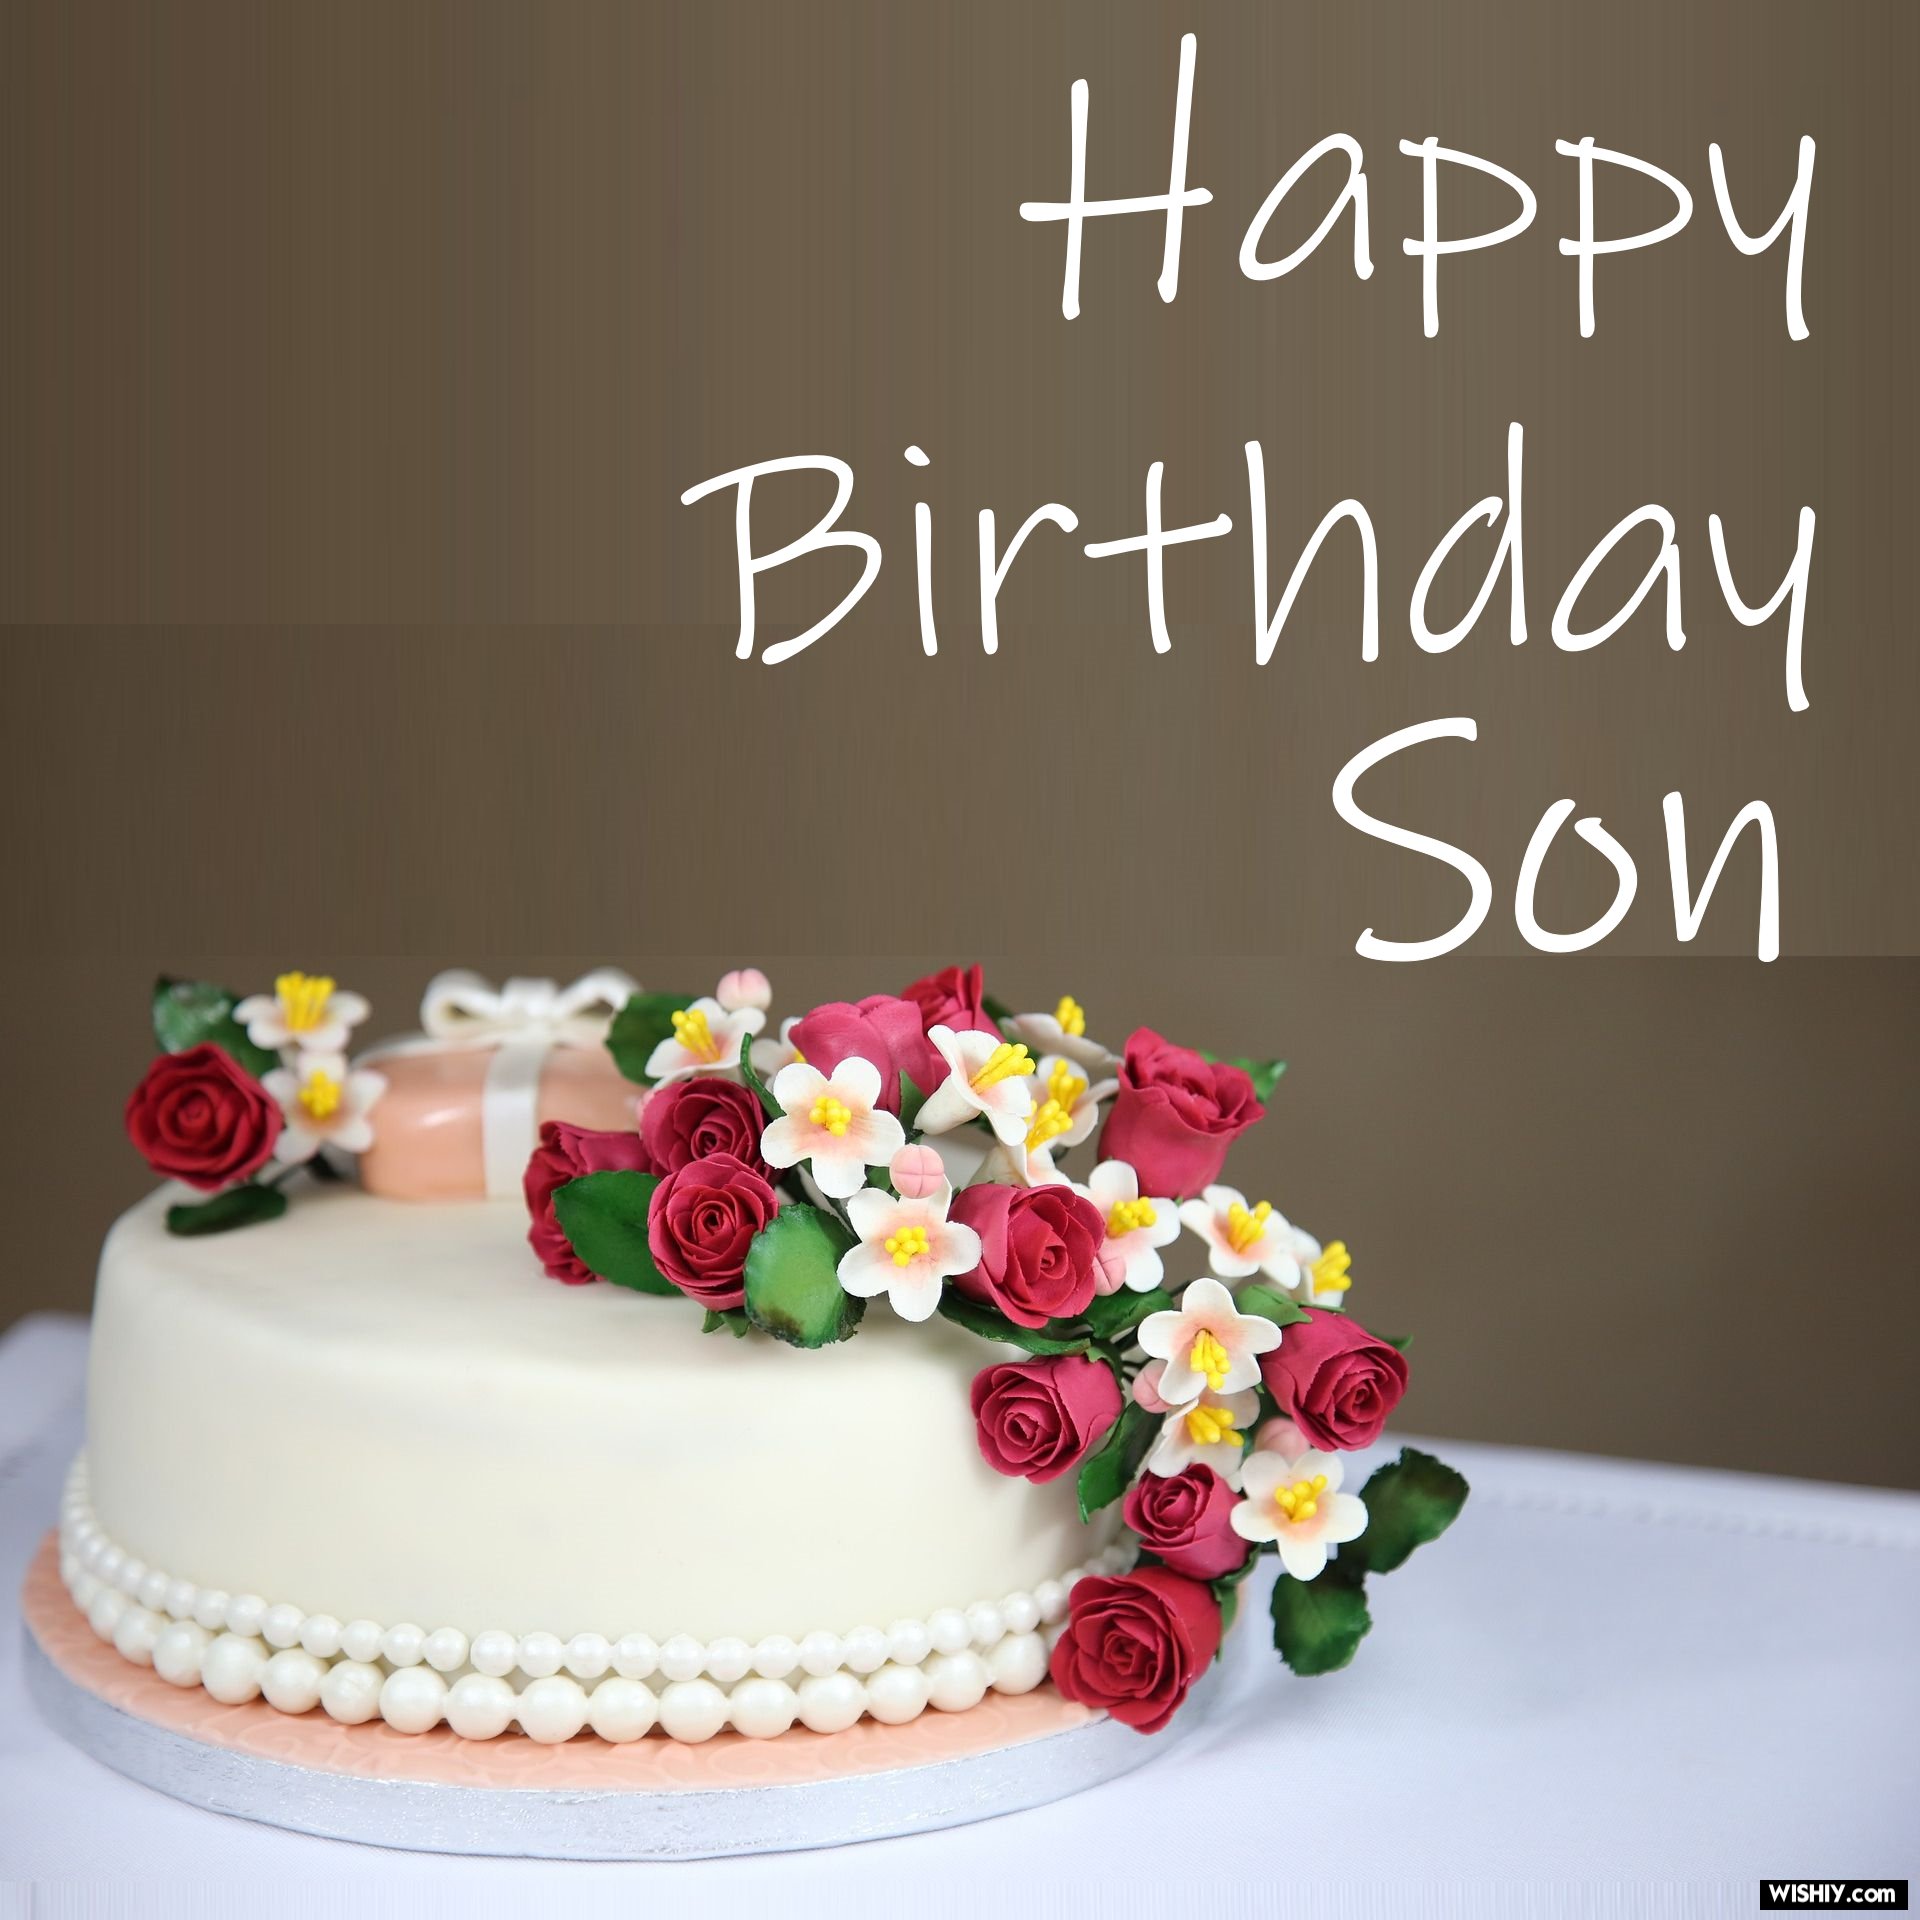 Birthday Cake Cards for Son | Birthday & Greeting Cards by Davia - Free  eCards